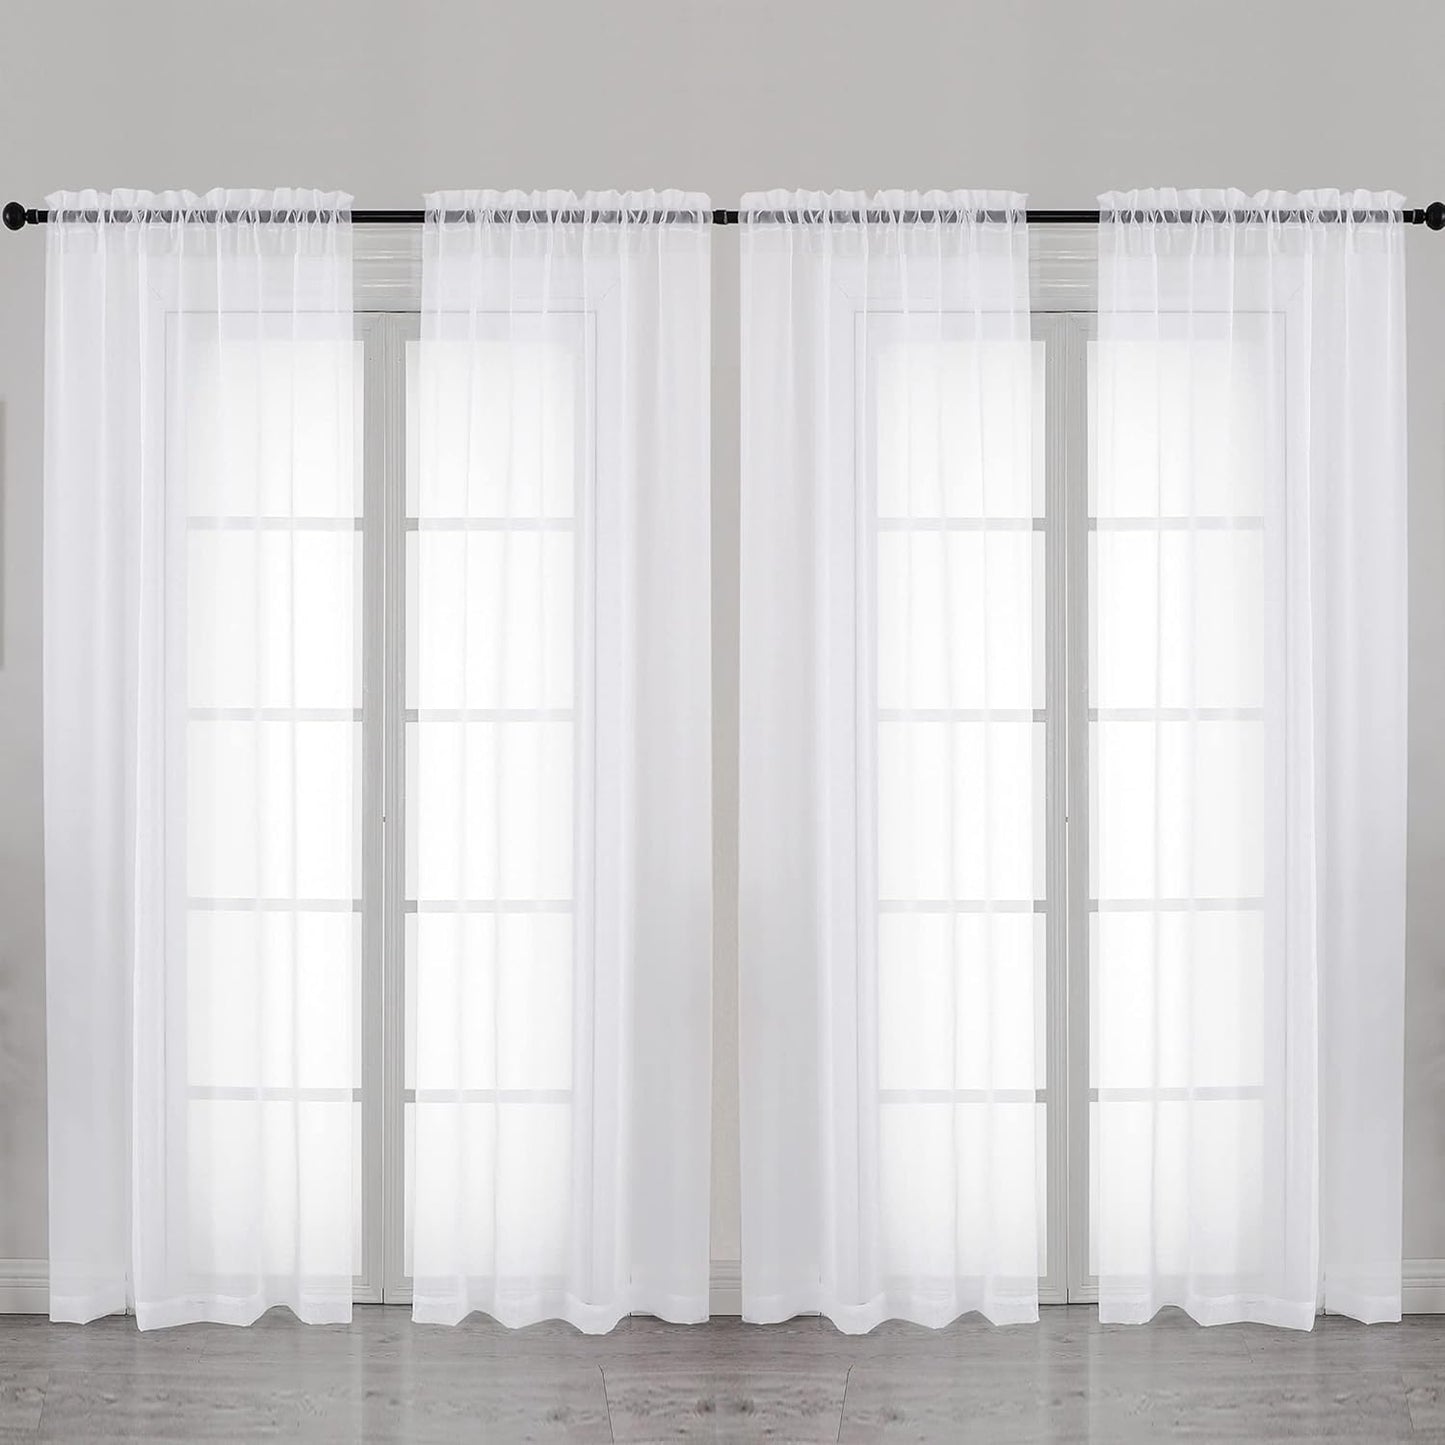 OVZME Sheer White Curtains 63 Inches Length Window Treatment for Kitchen, Elegant Airy Transparent Curtain Draperies Rod Pocket for Kids Living Room, 2 Pair 4 Panels, Each 42 Width 63 Length  OVZME White 42W X 72L 